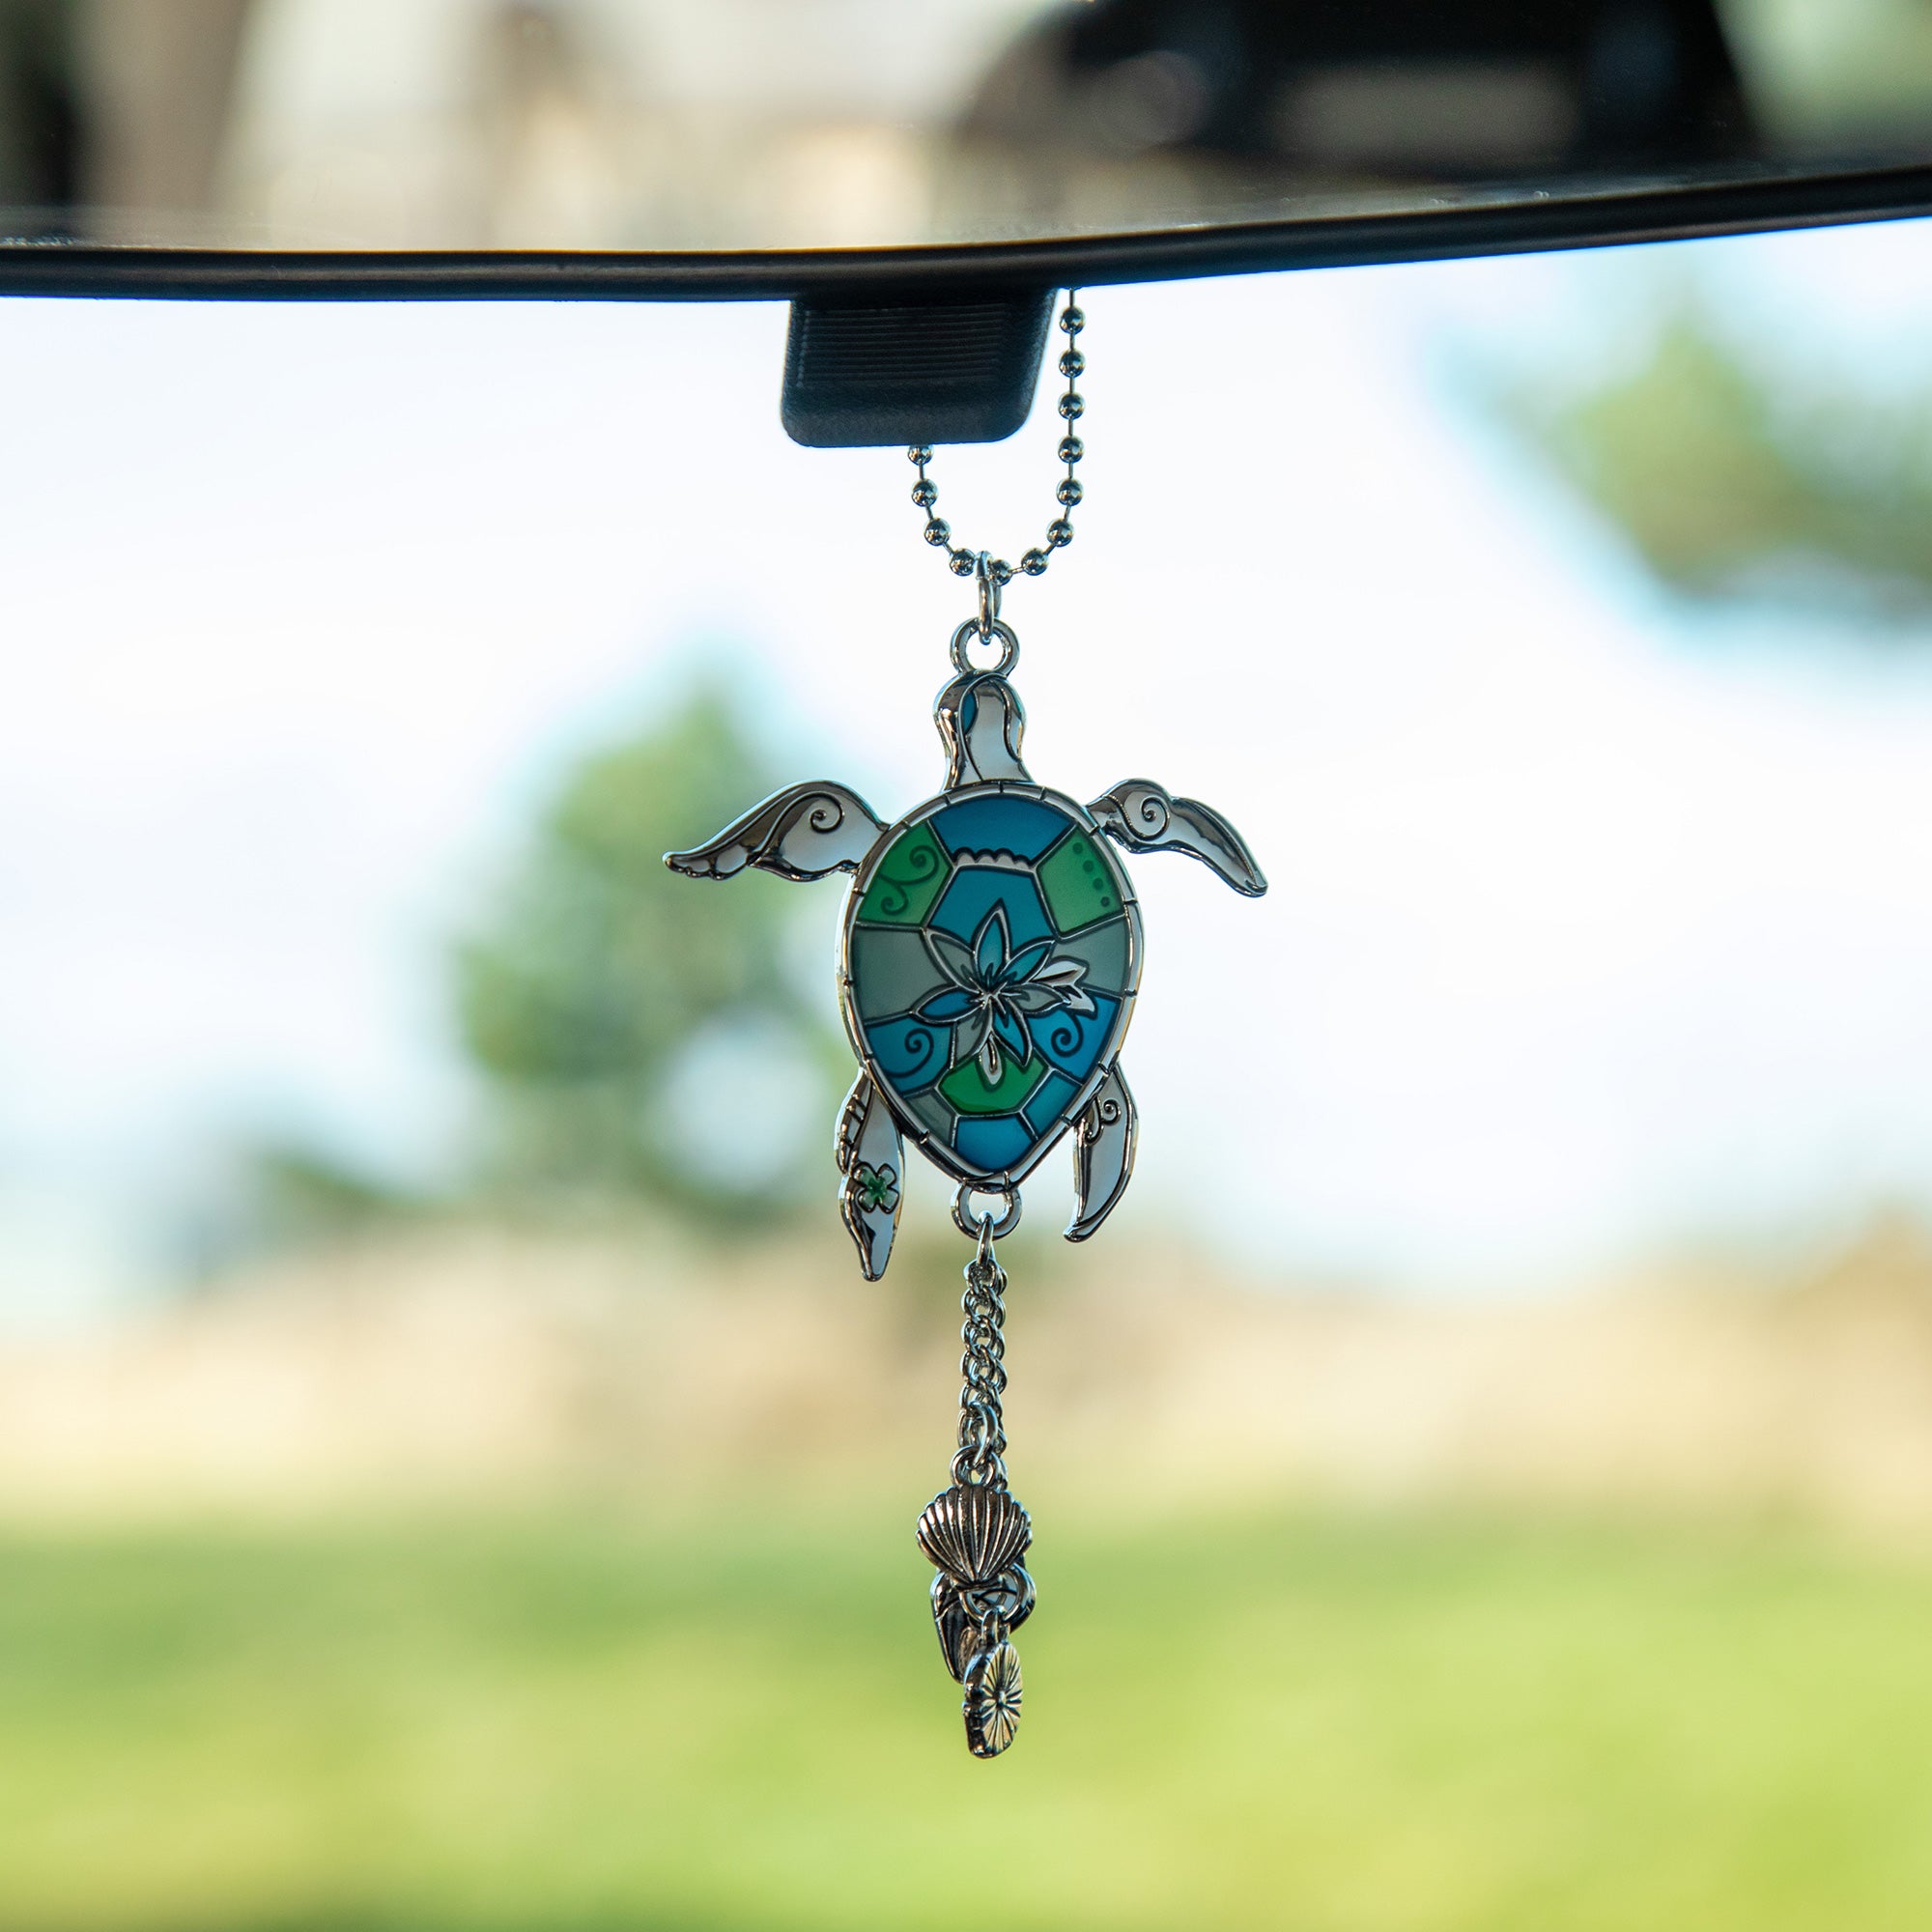 Colorful Creations Car Charm - Dragonfly